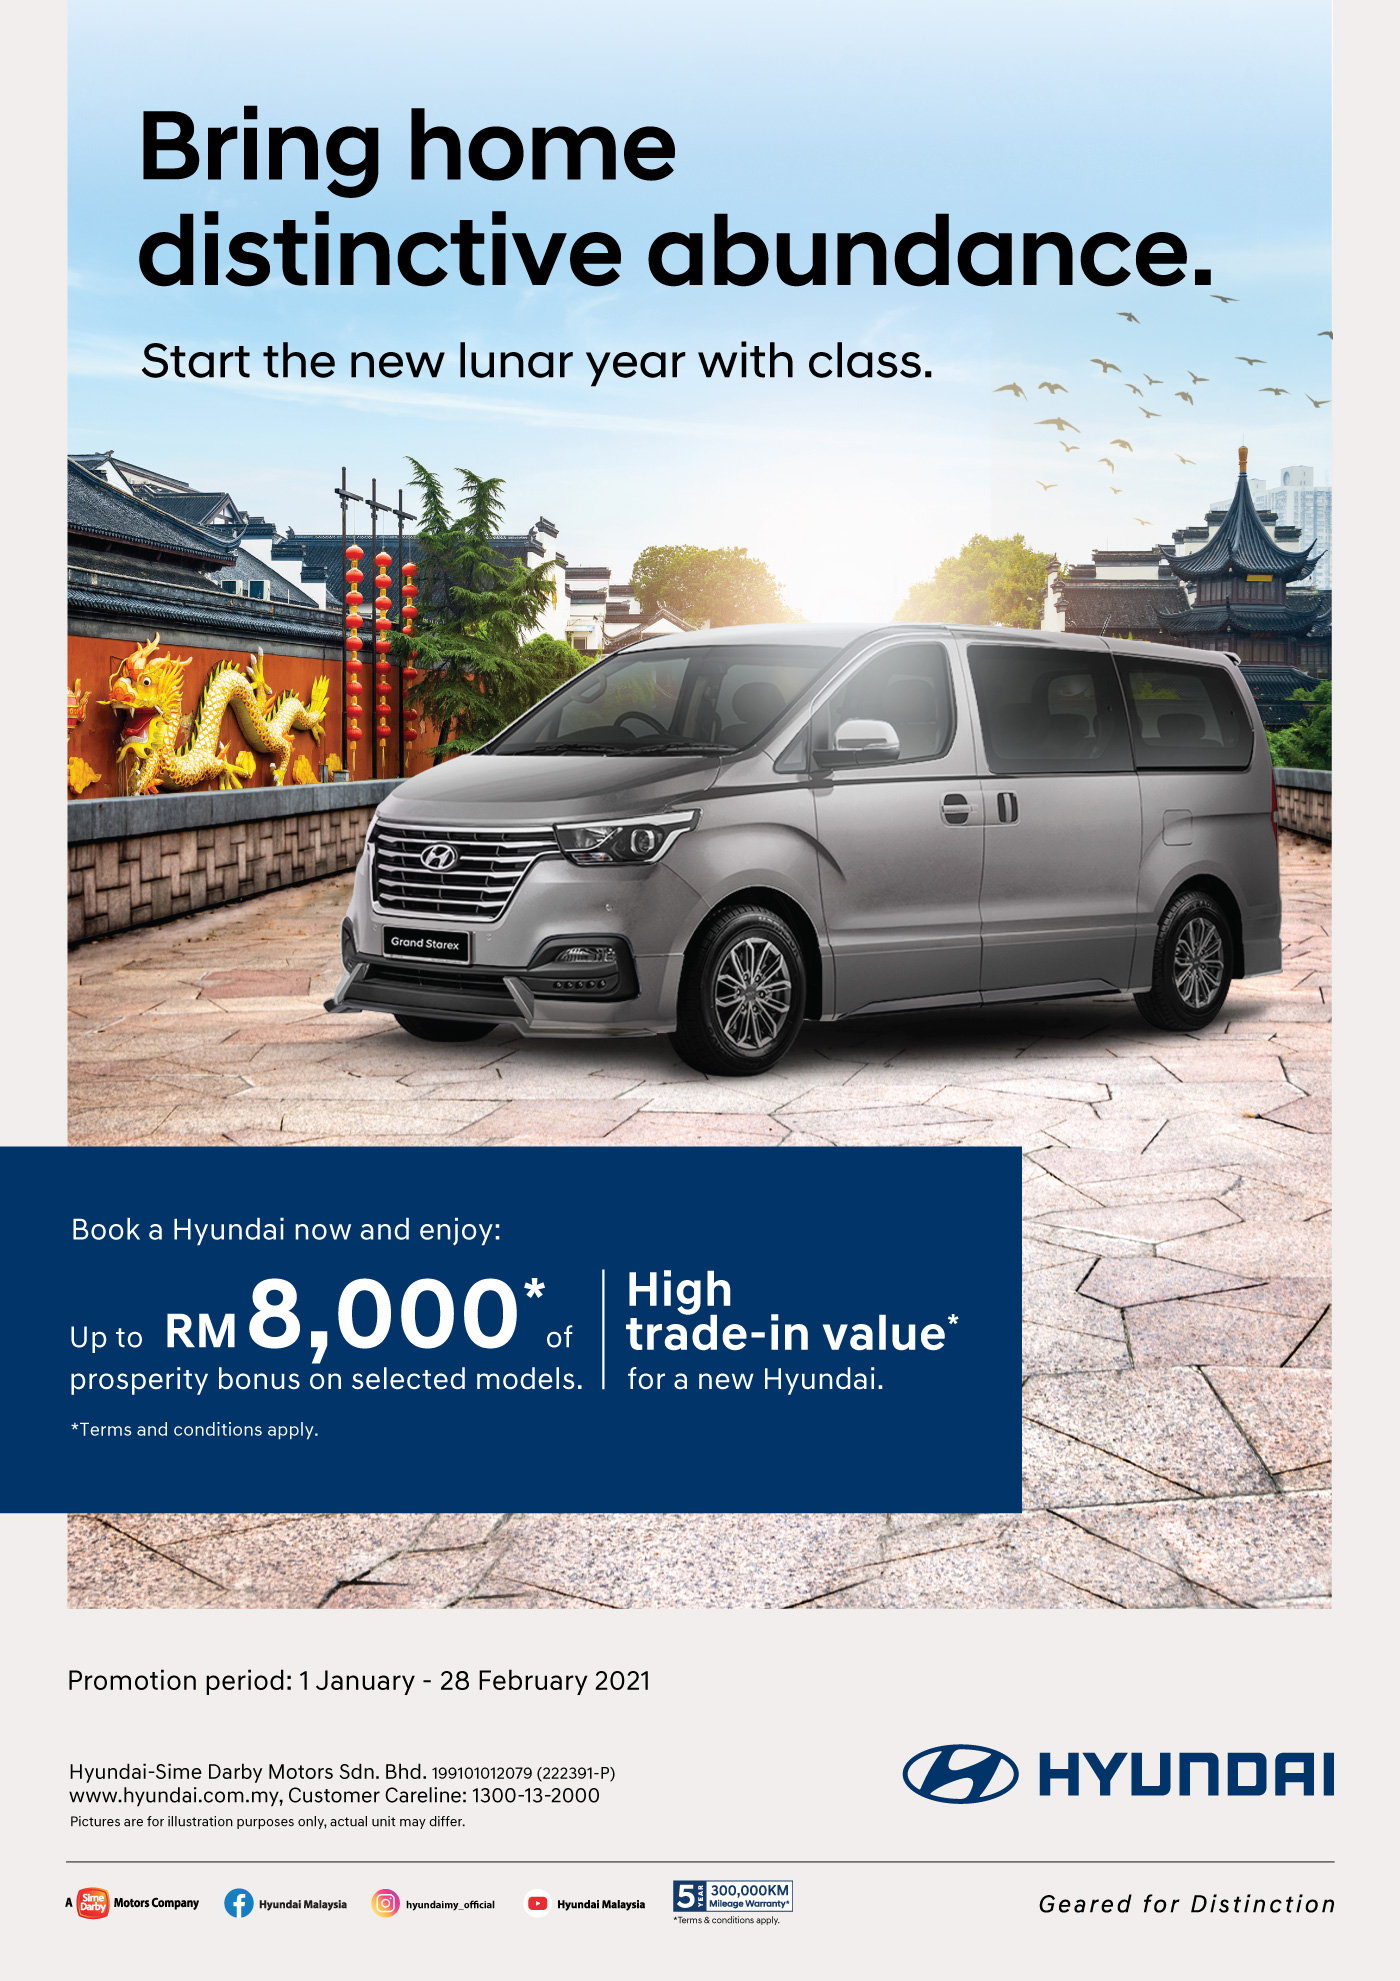 Bring home distinctive abundance. | Start the new lunar year with class. | Book a Hyundai now and enjoy up to RM8,000* of prosperity bonus on selected models. | High trade-in value* for a new Hyundai. Terms & conditiona apply.